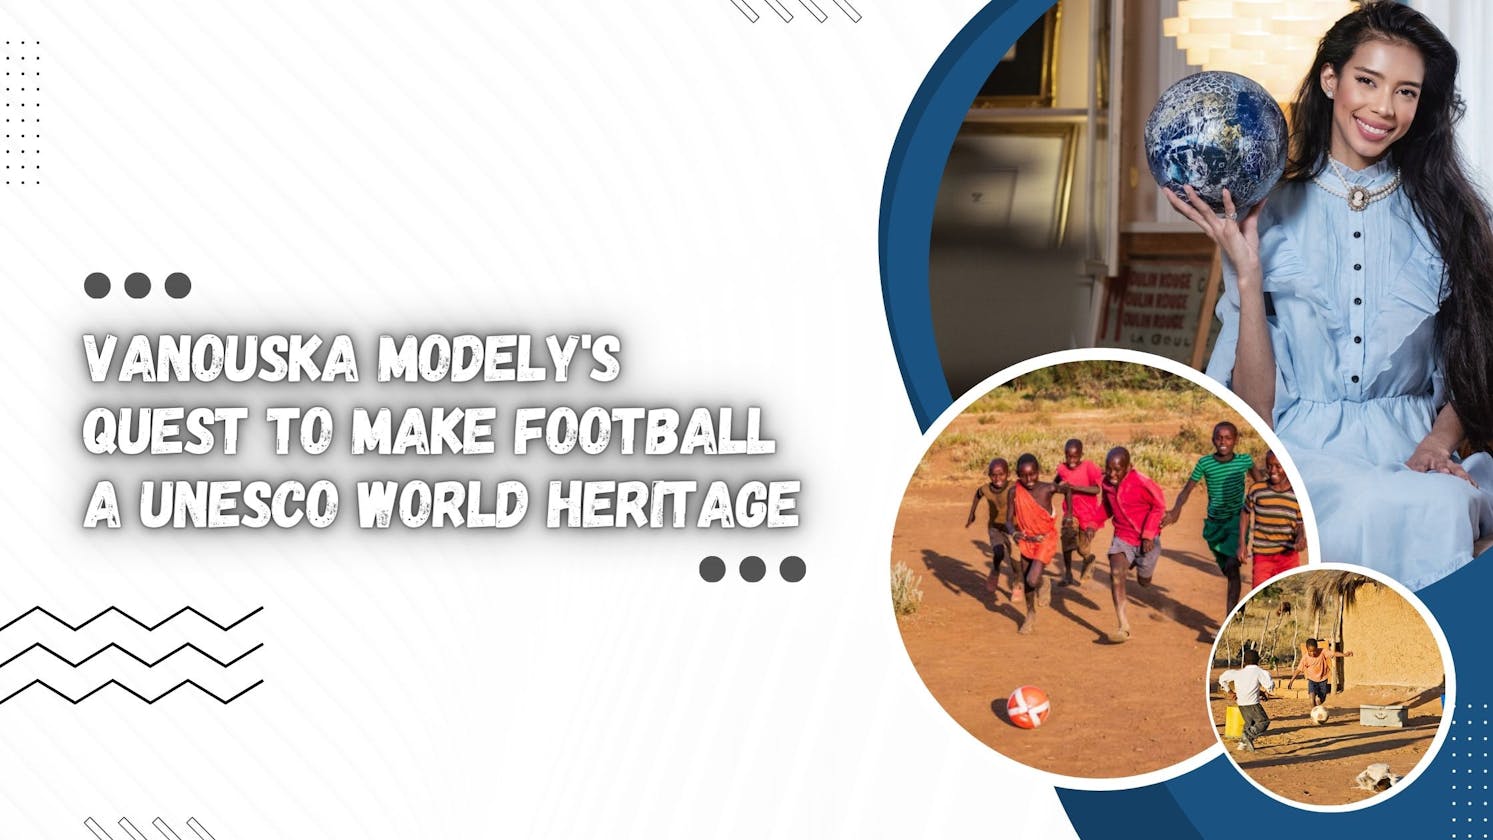 Vanouska Modely's Quest to Make Football a UNESCO World Heritage